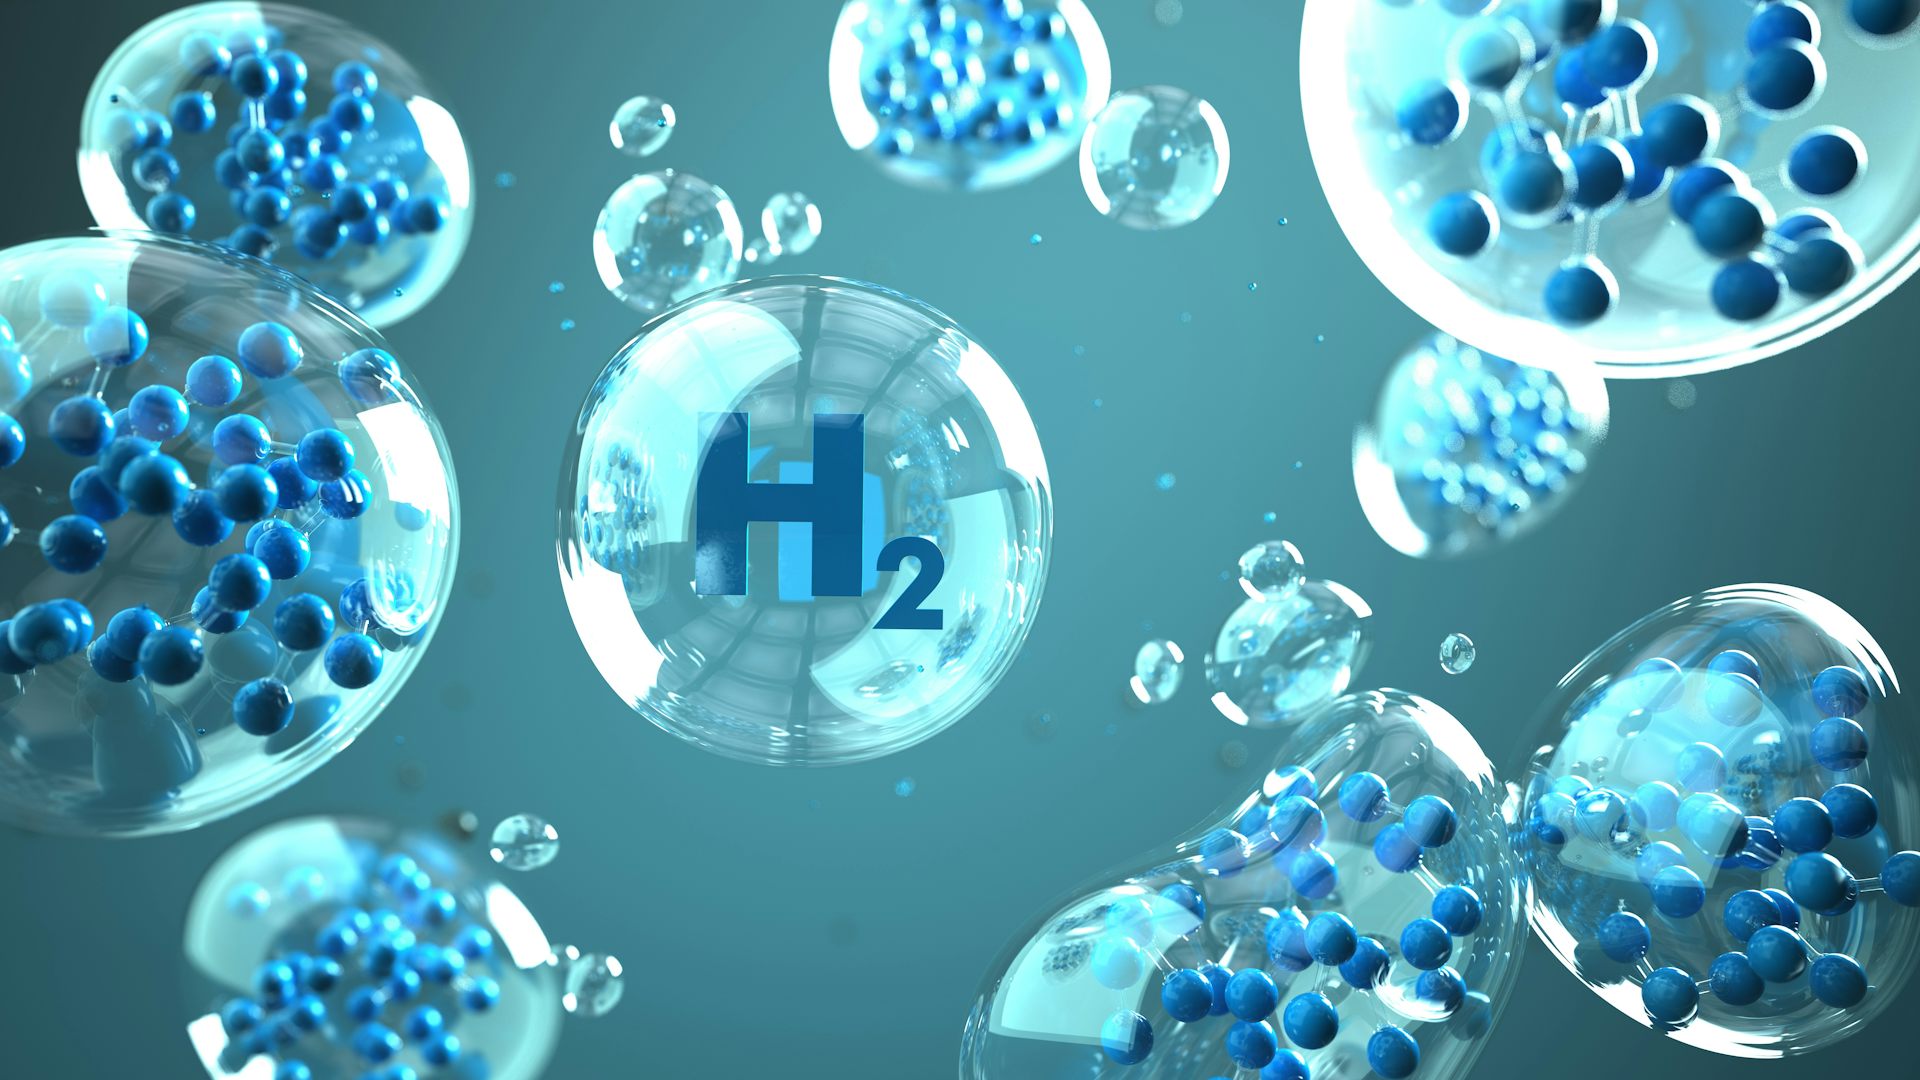 Blue hydrogen – what is it, and should it replace natural gas?